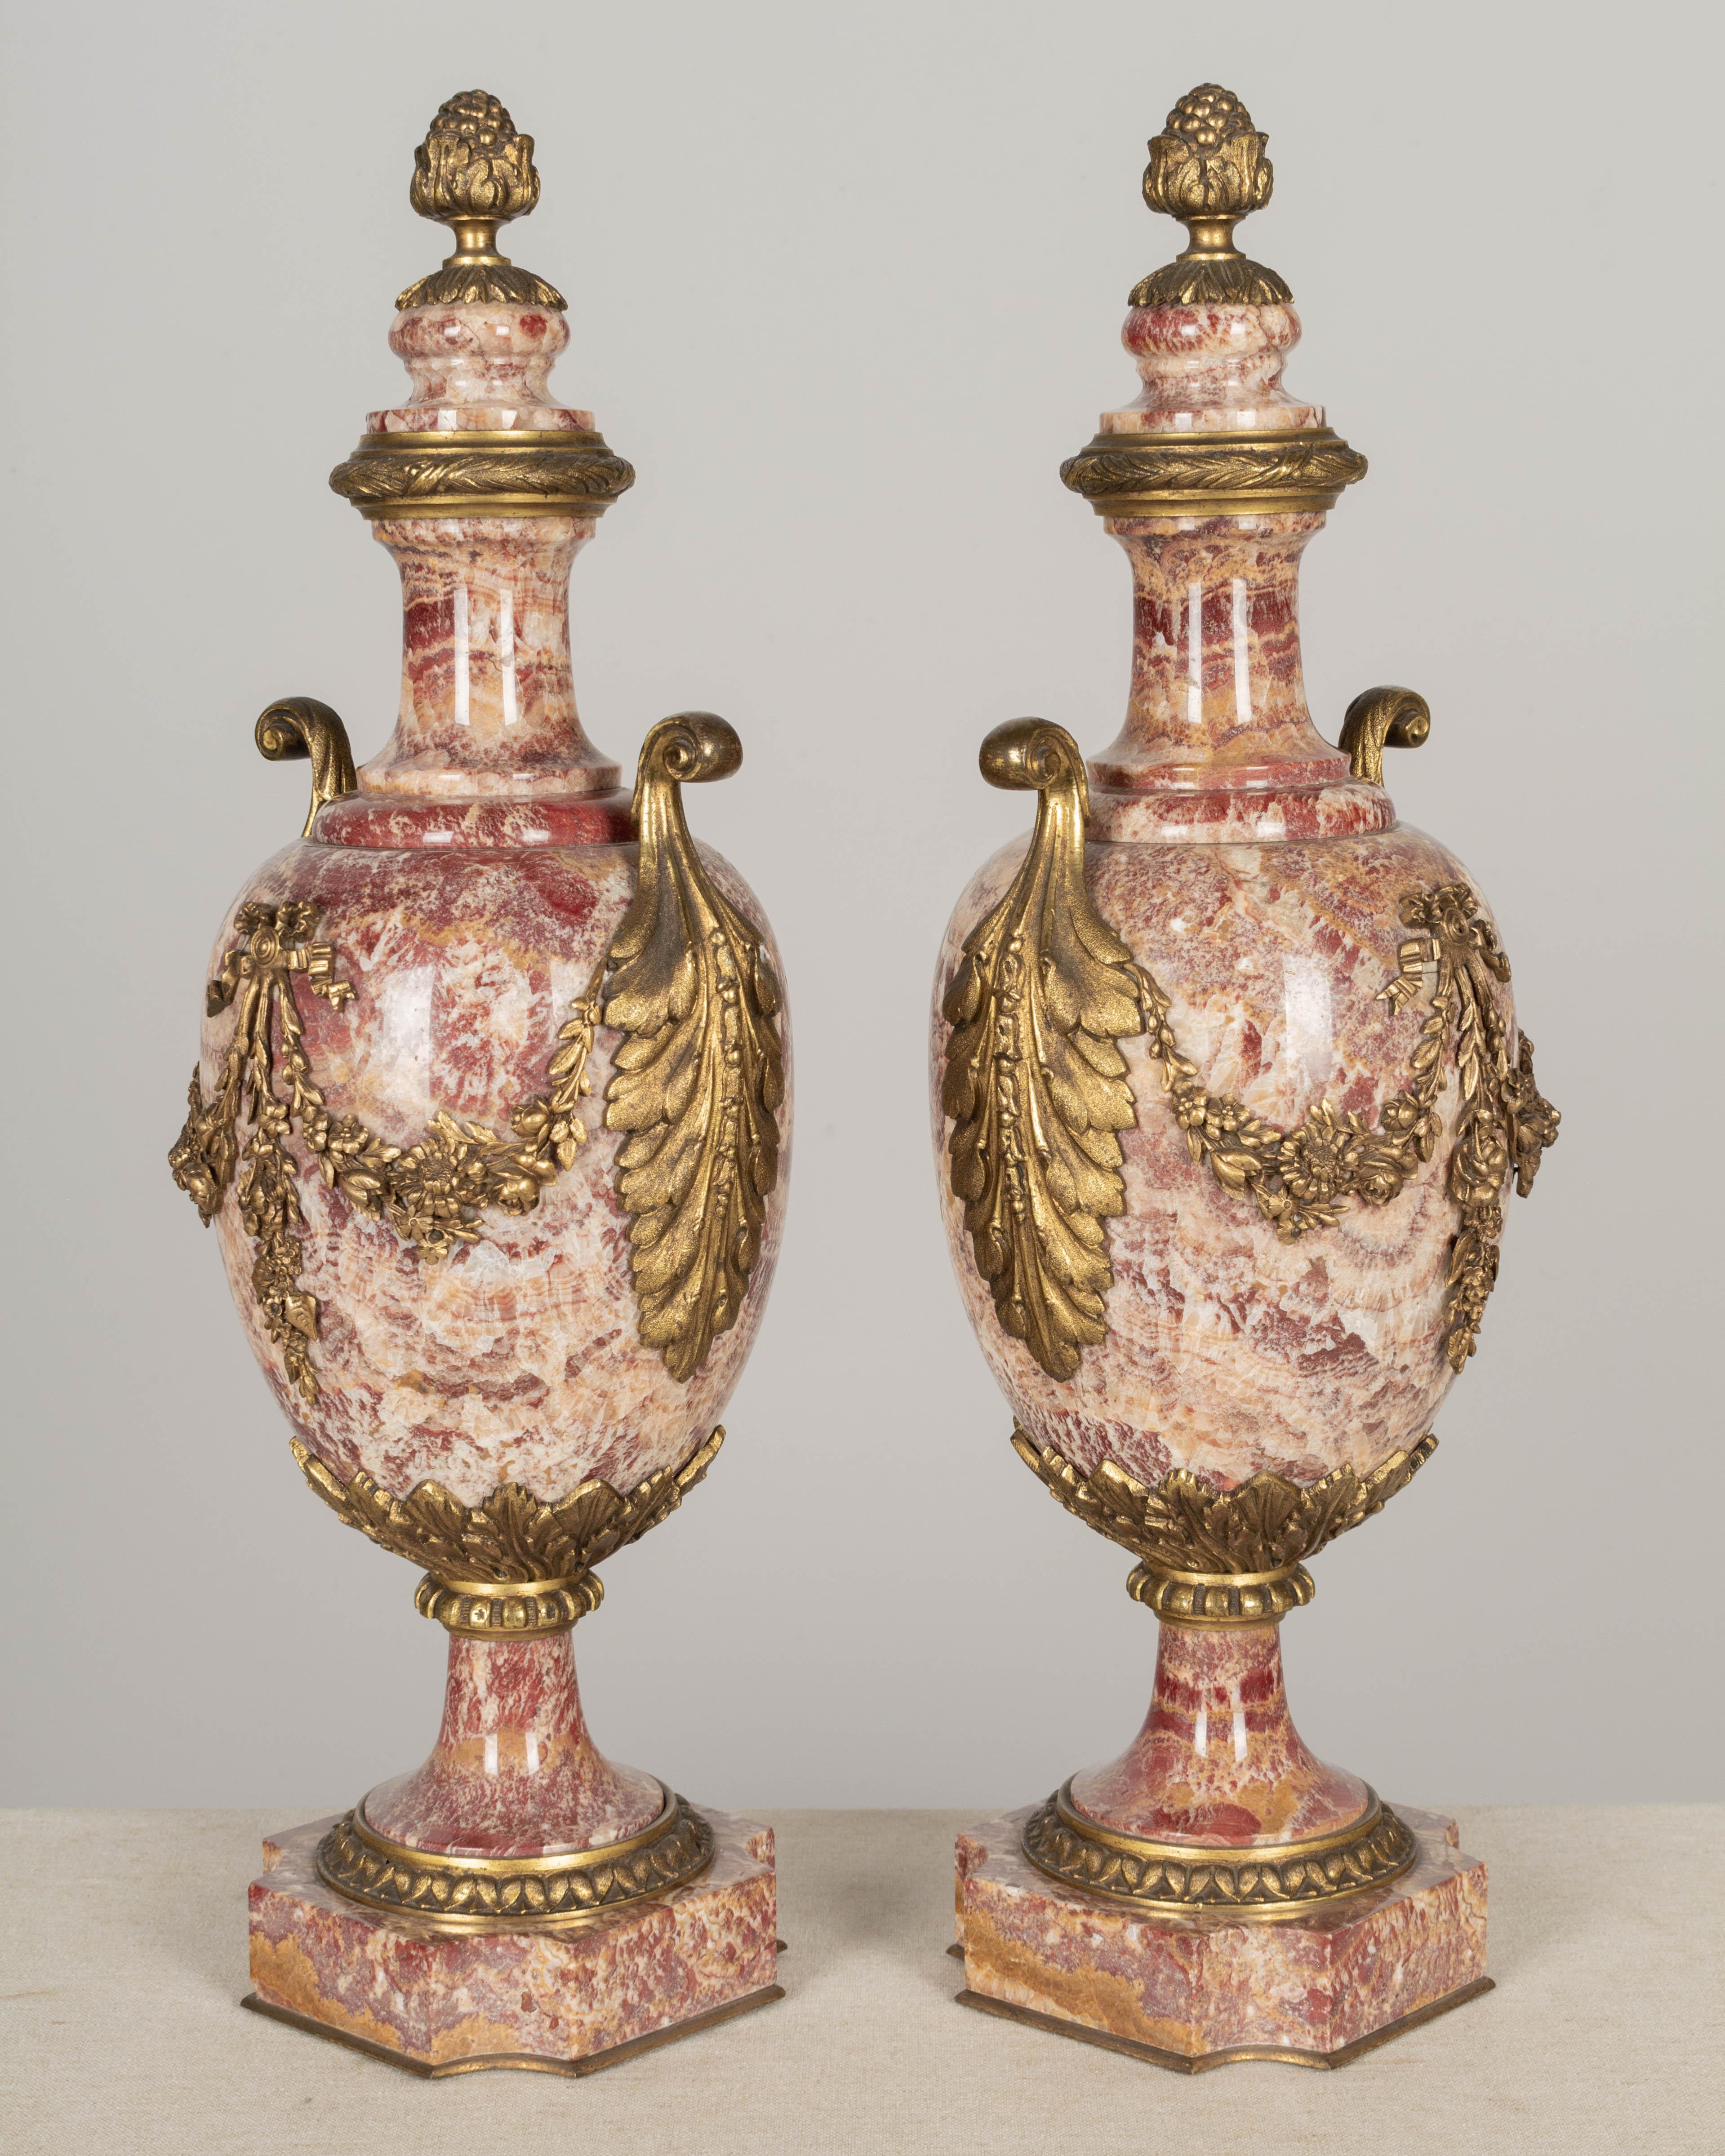 19th Century French Marble and Bronze Cassolette Urns Pair For Sale 2